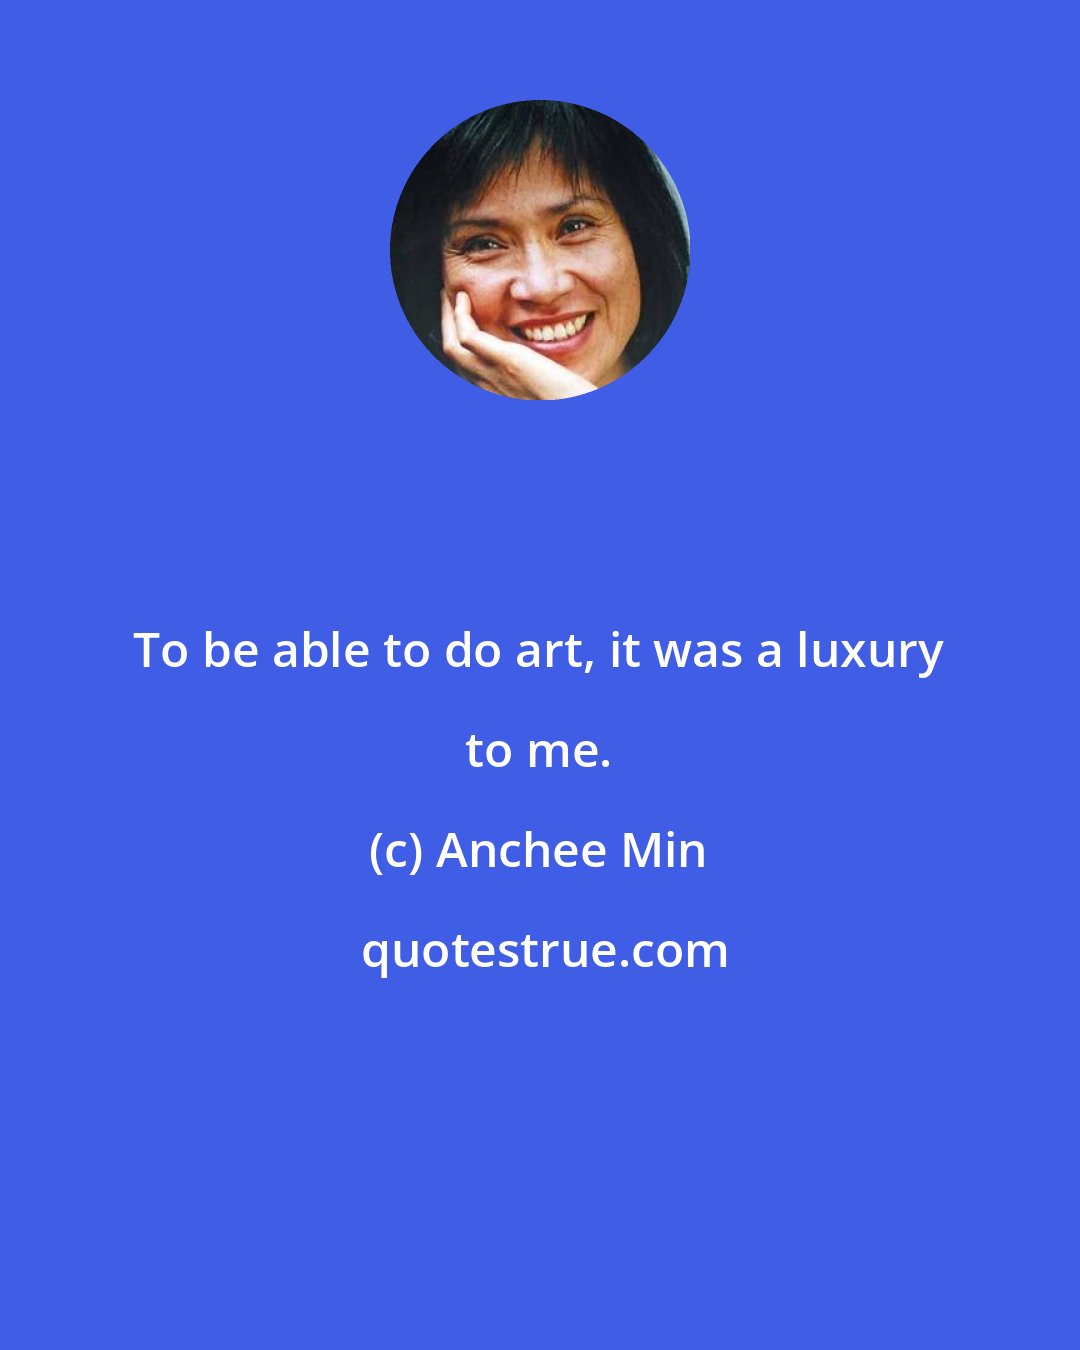 Anchee Min: To be able to do art, it was a luxury to me.